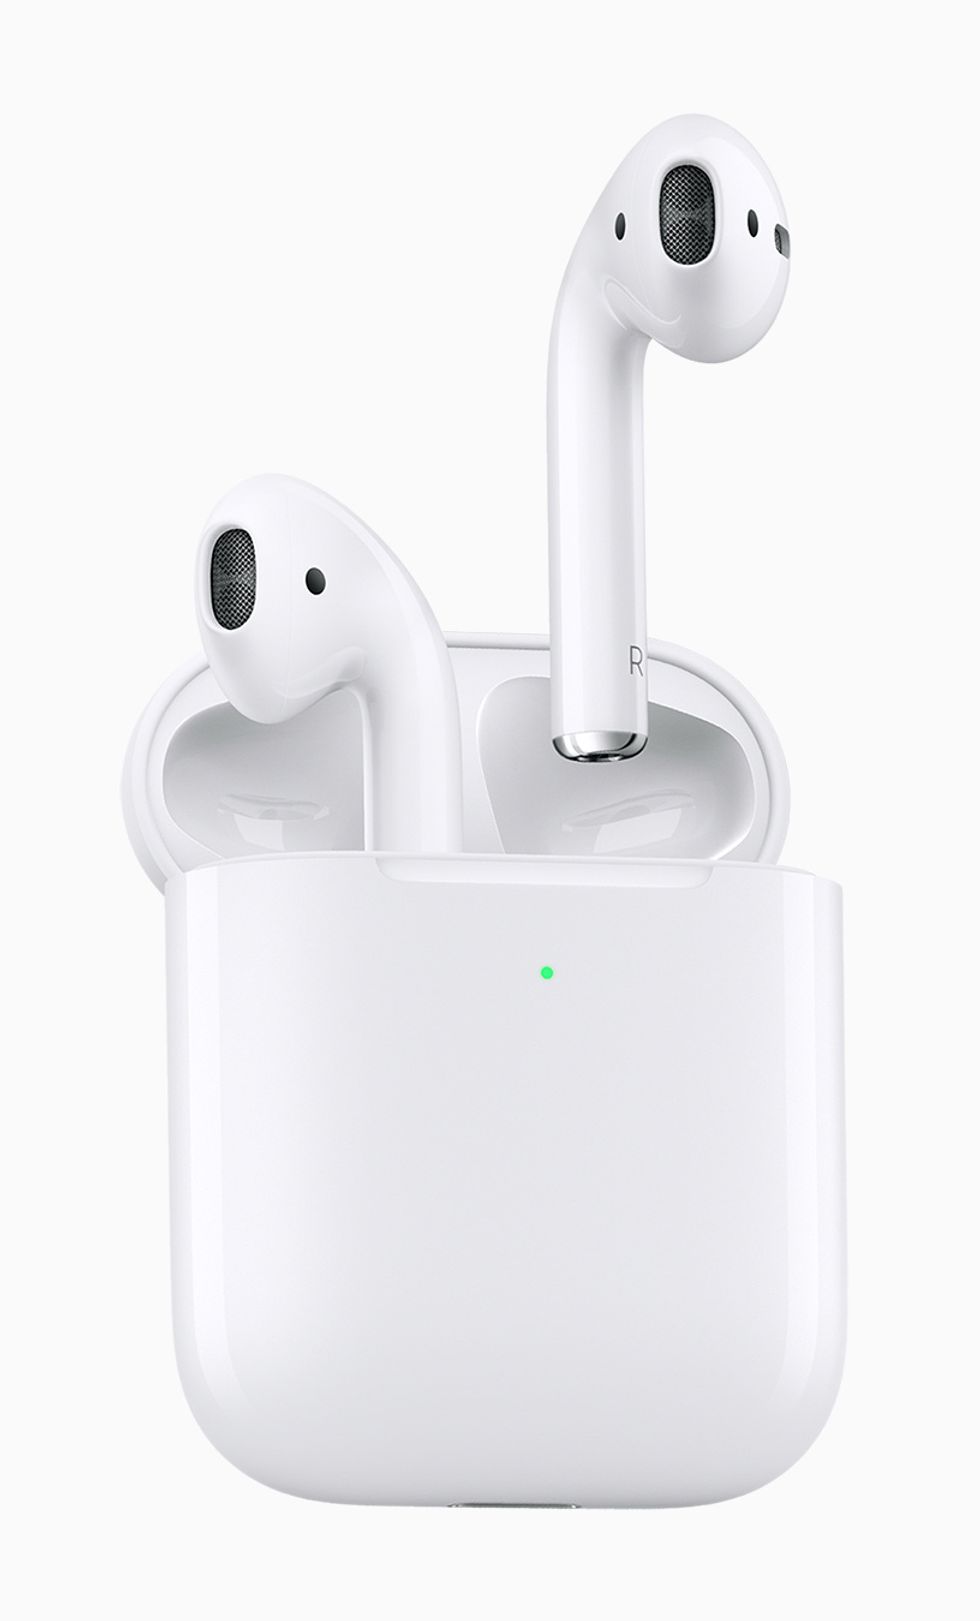 A photo of the new Apple AirPods 2, which look almost identical to the original generation